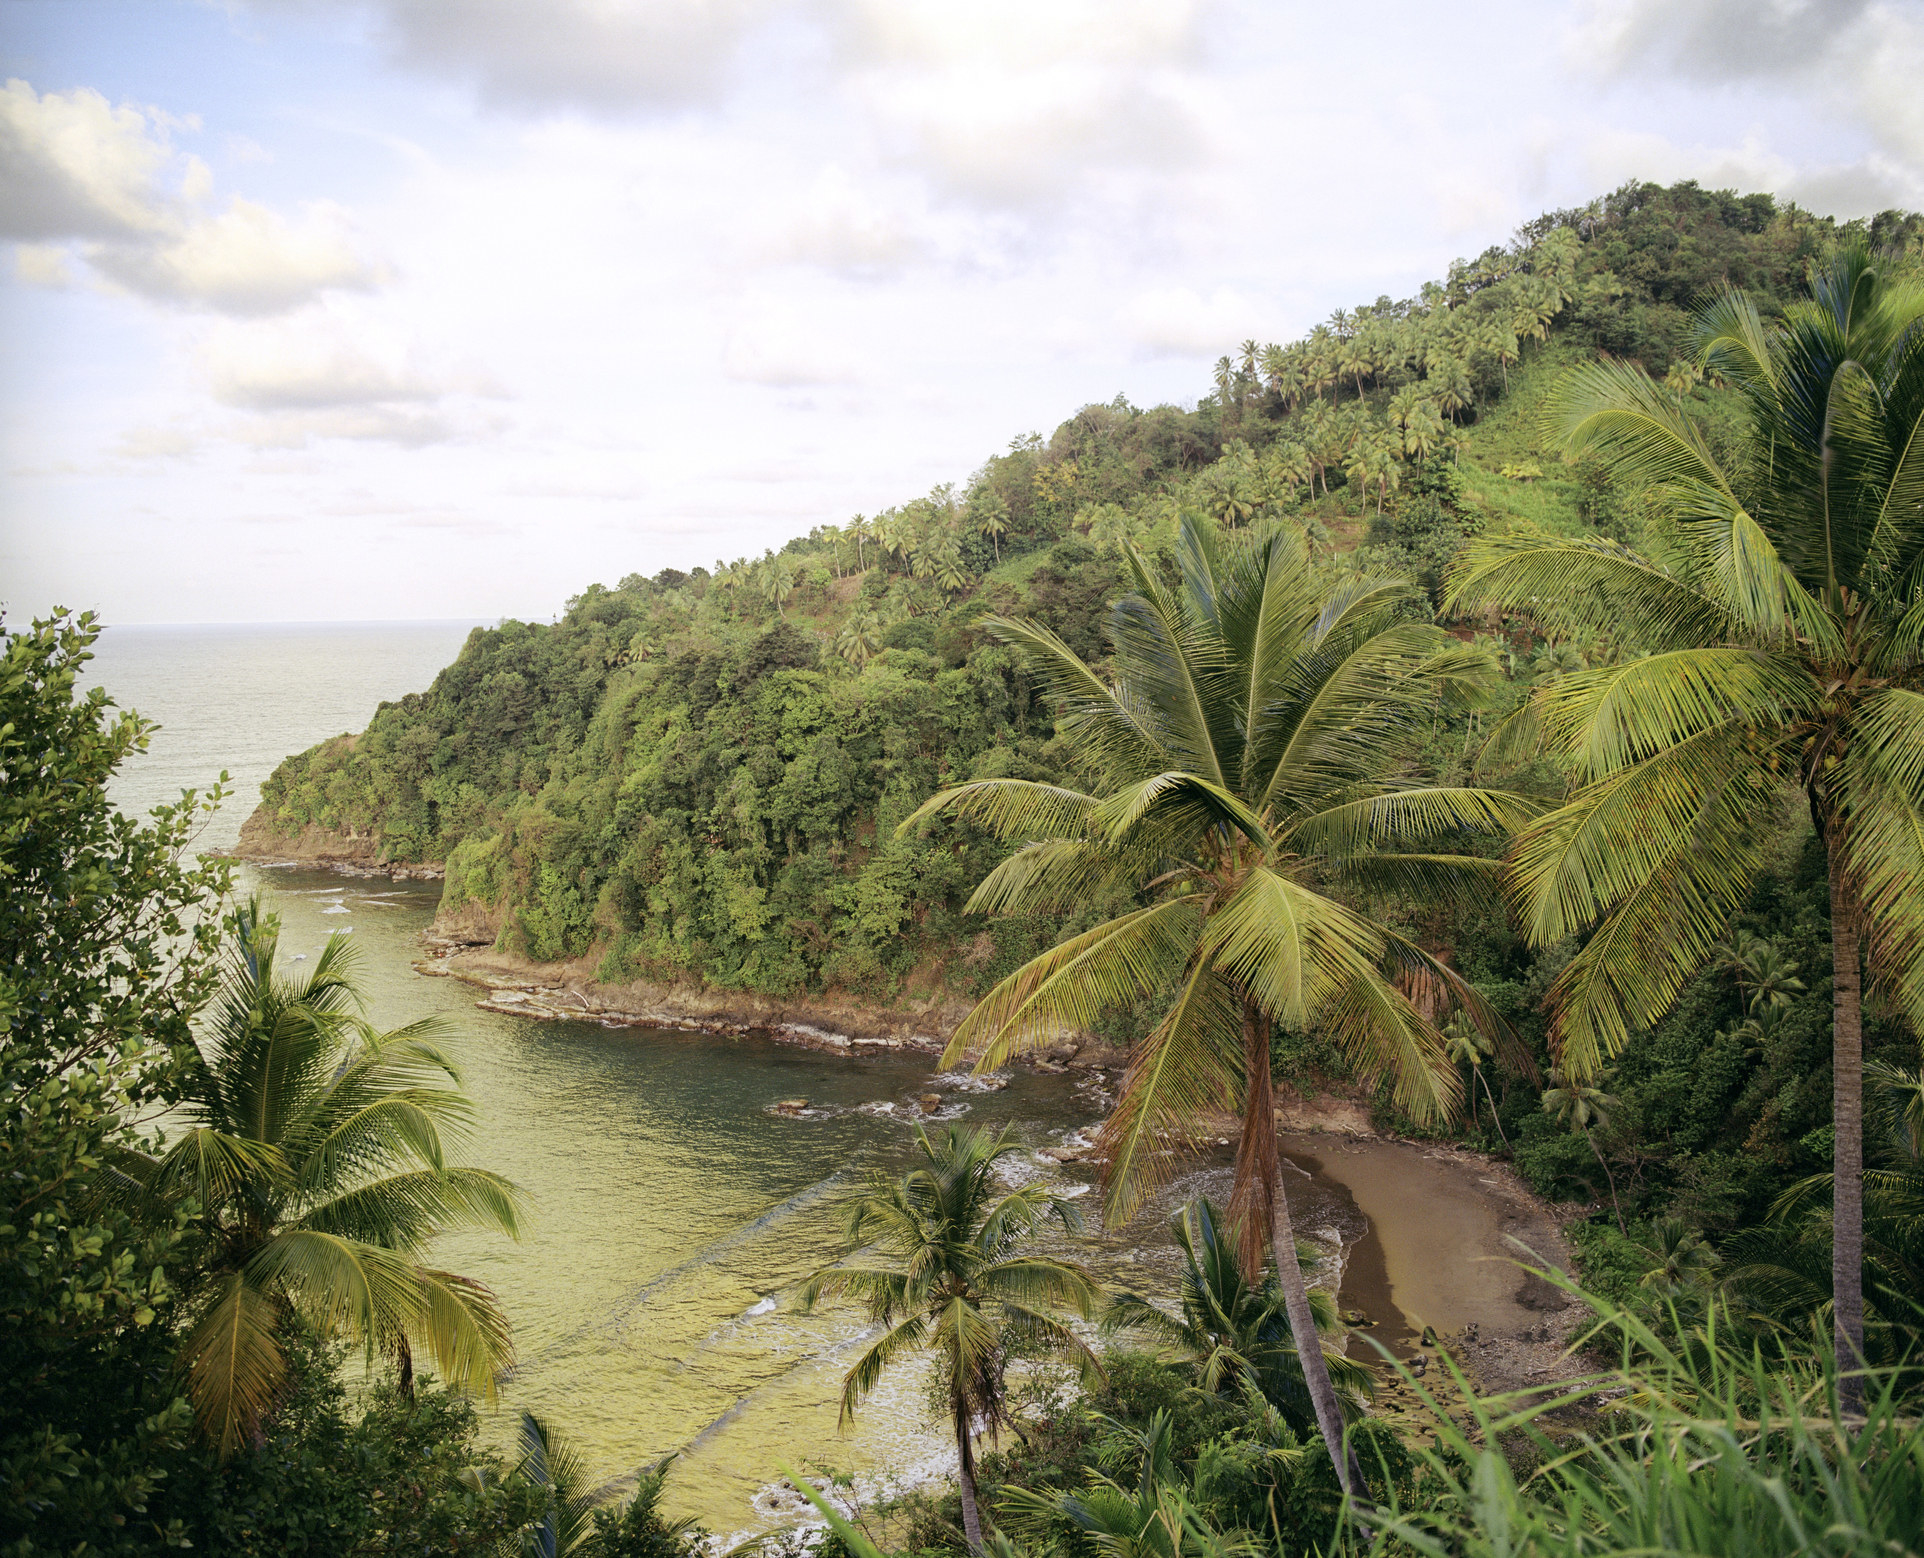 A view of the Atlantic ocean and coast above a beach in Dominica.